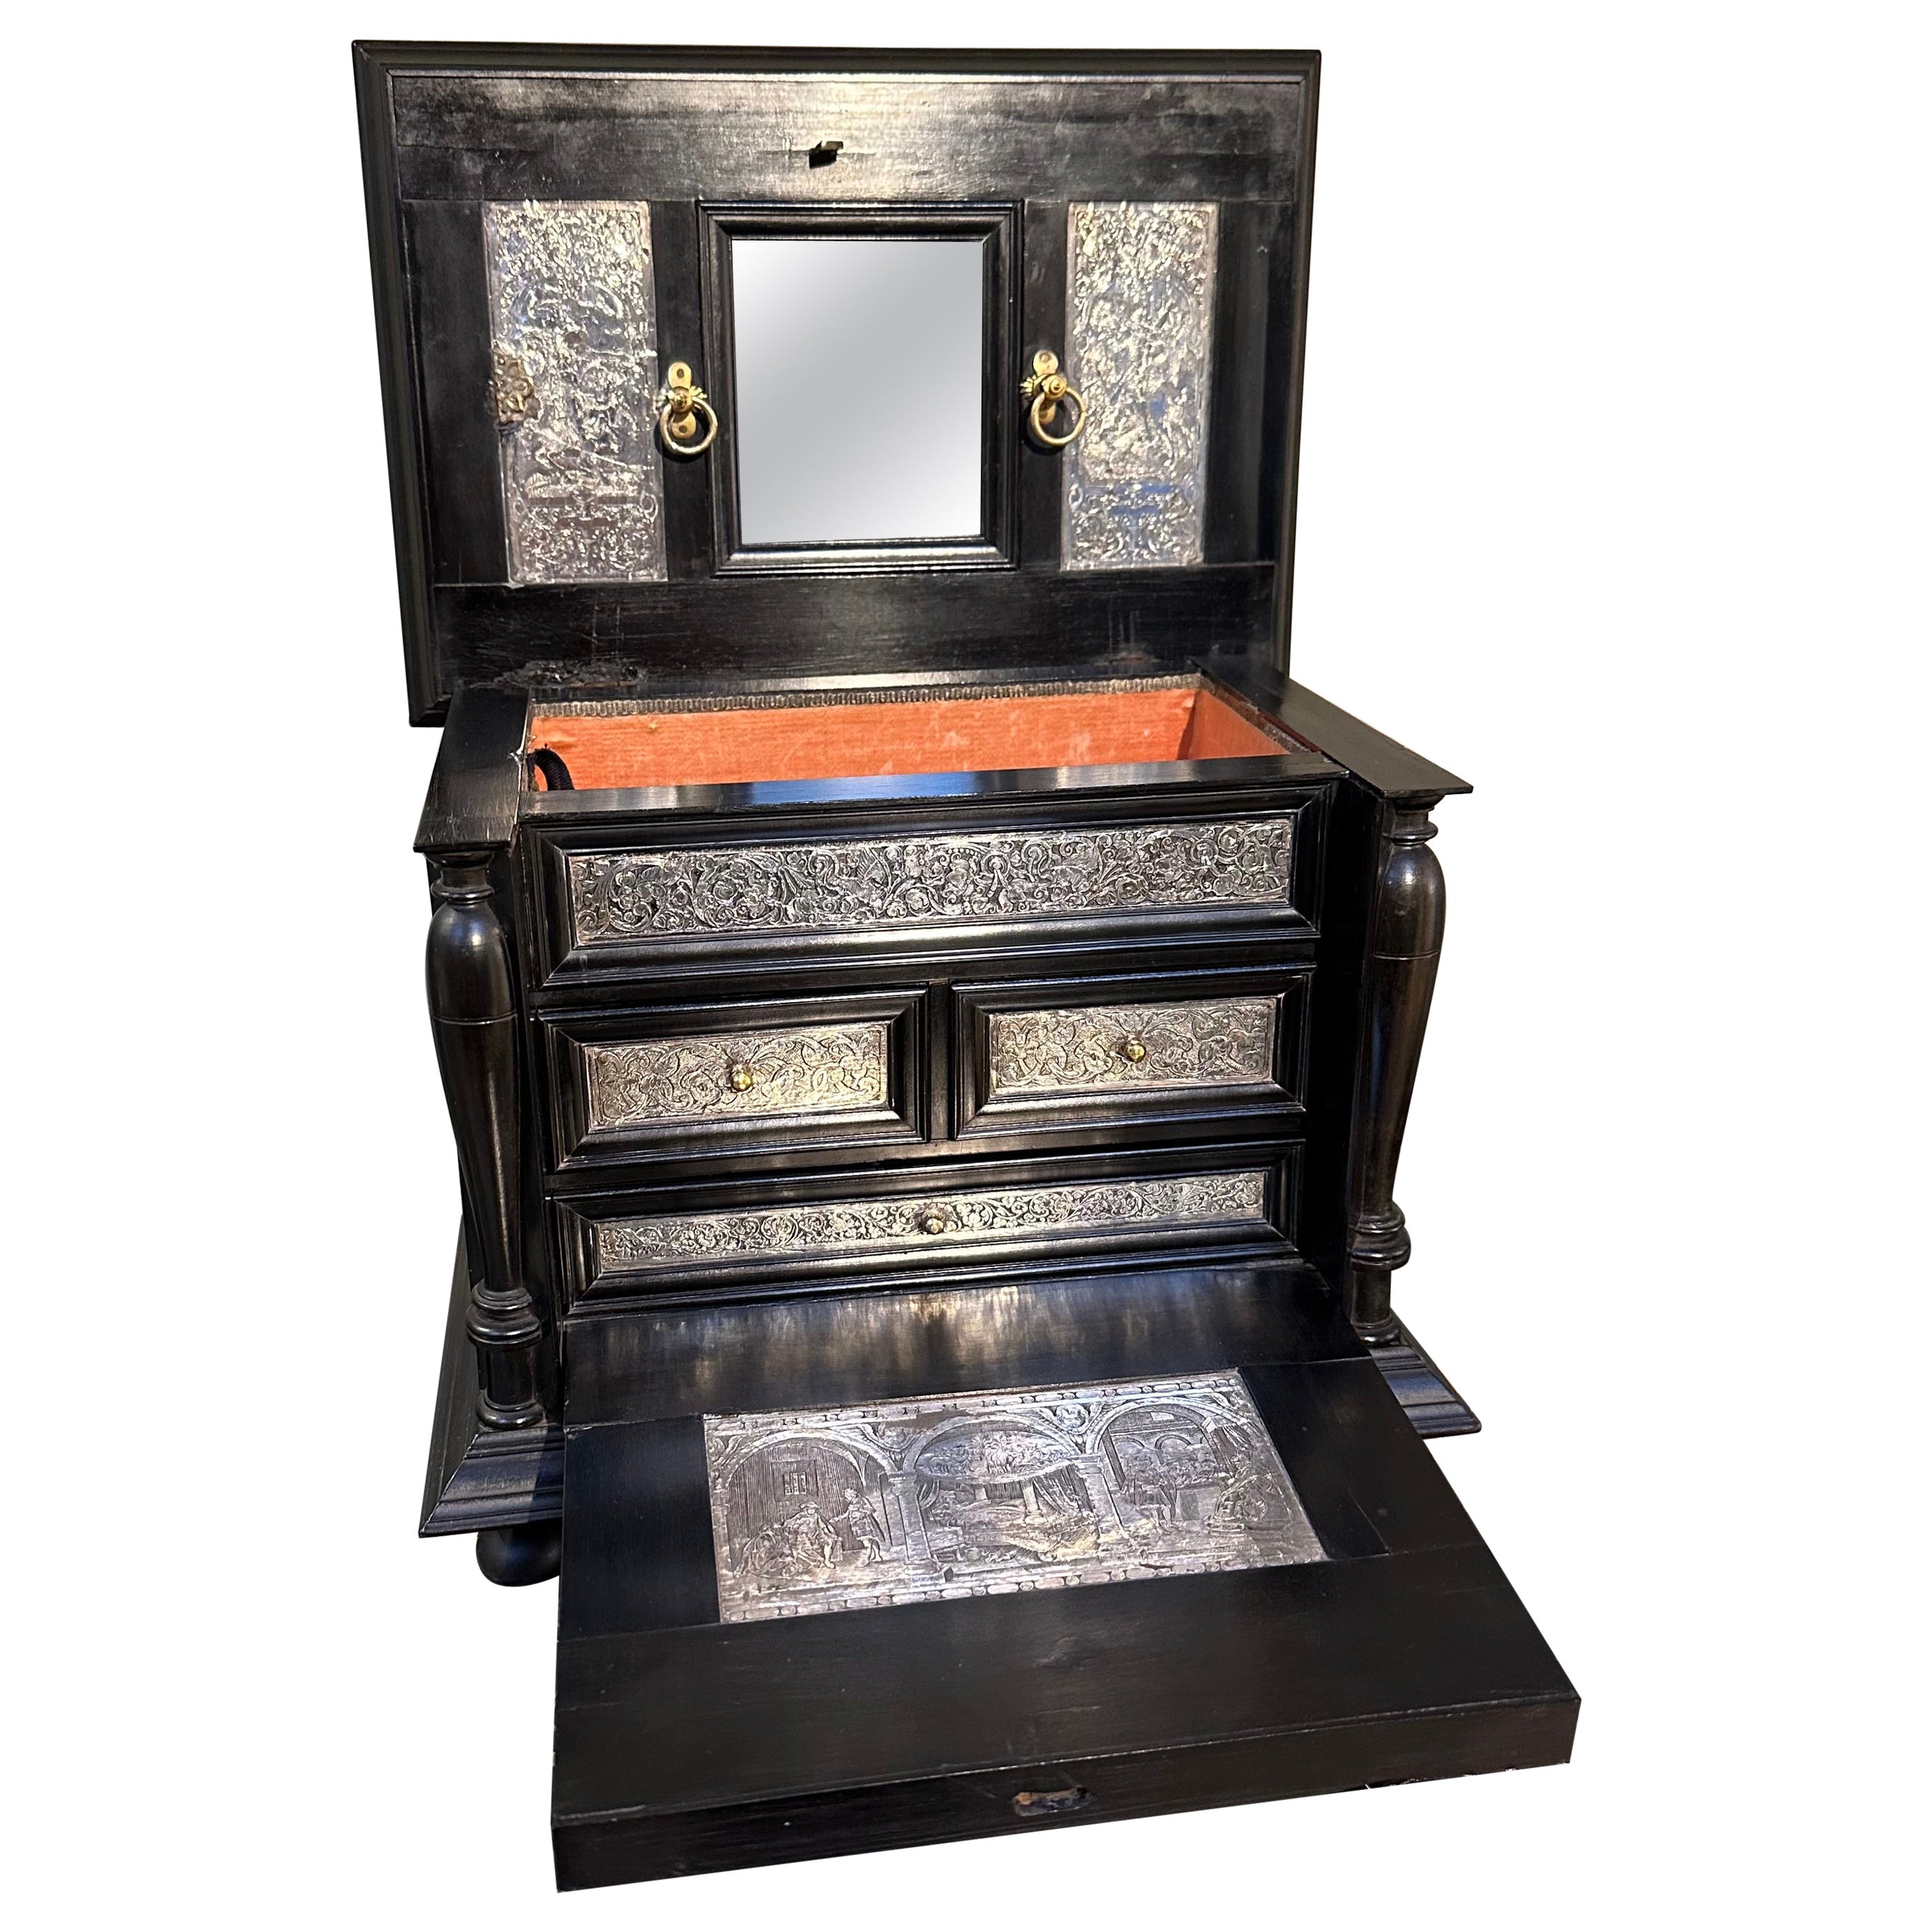 Rare 17th Century Baroque Ebony with Silver Cabinet, Antwerp, Wunderkammer For Sale